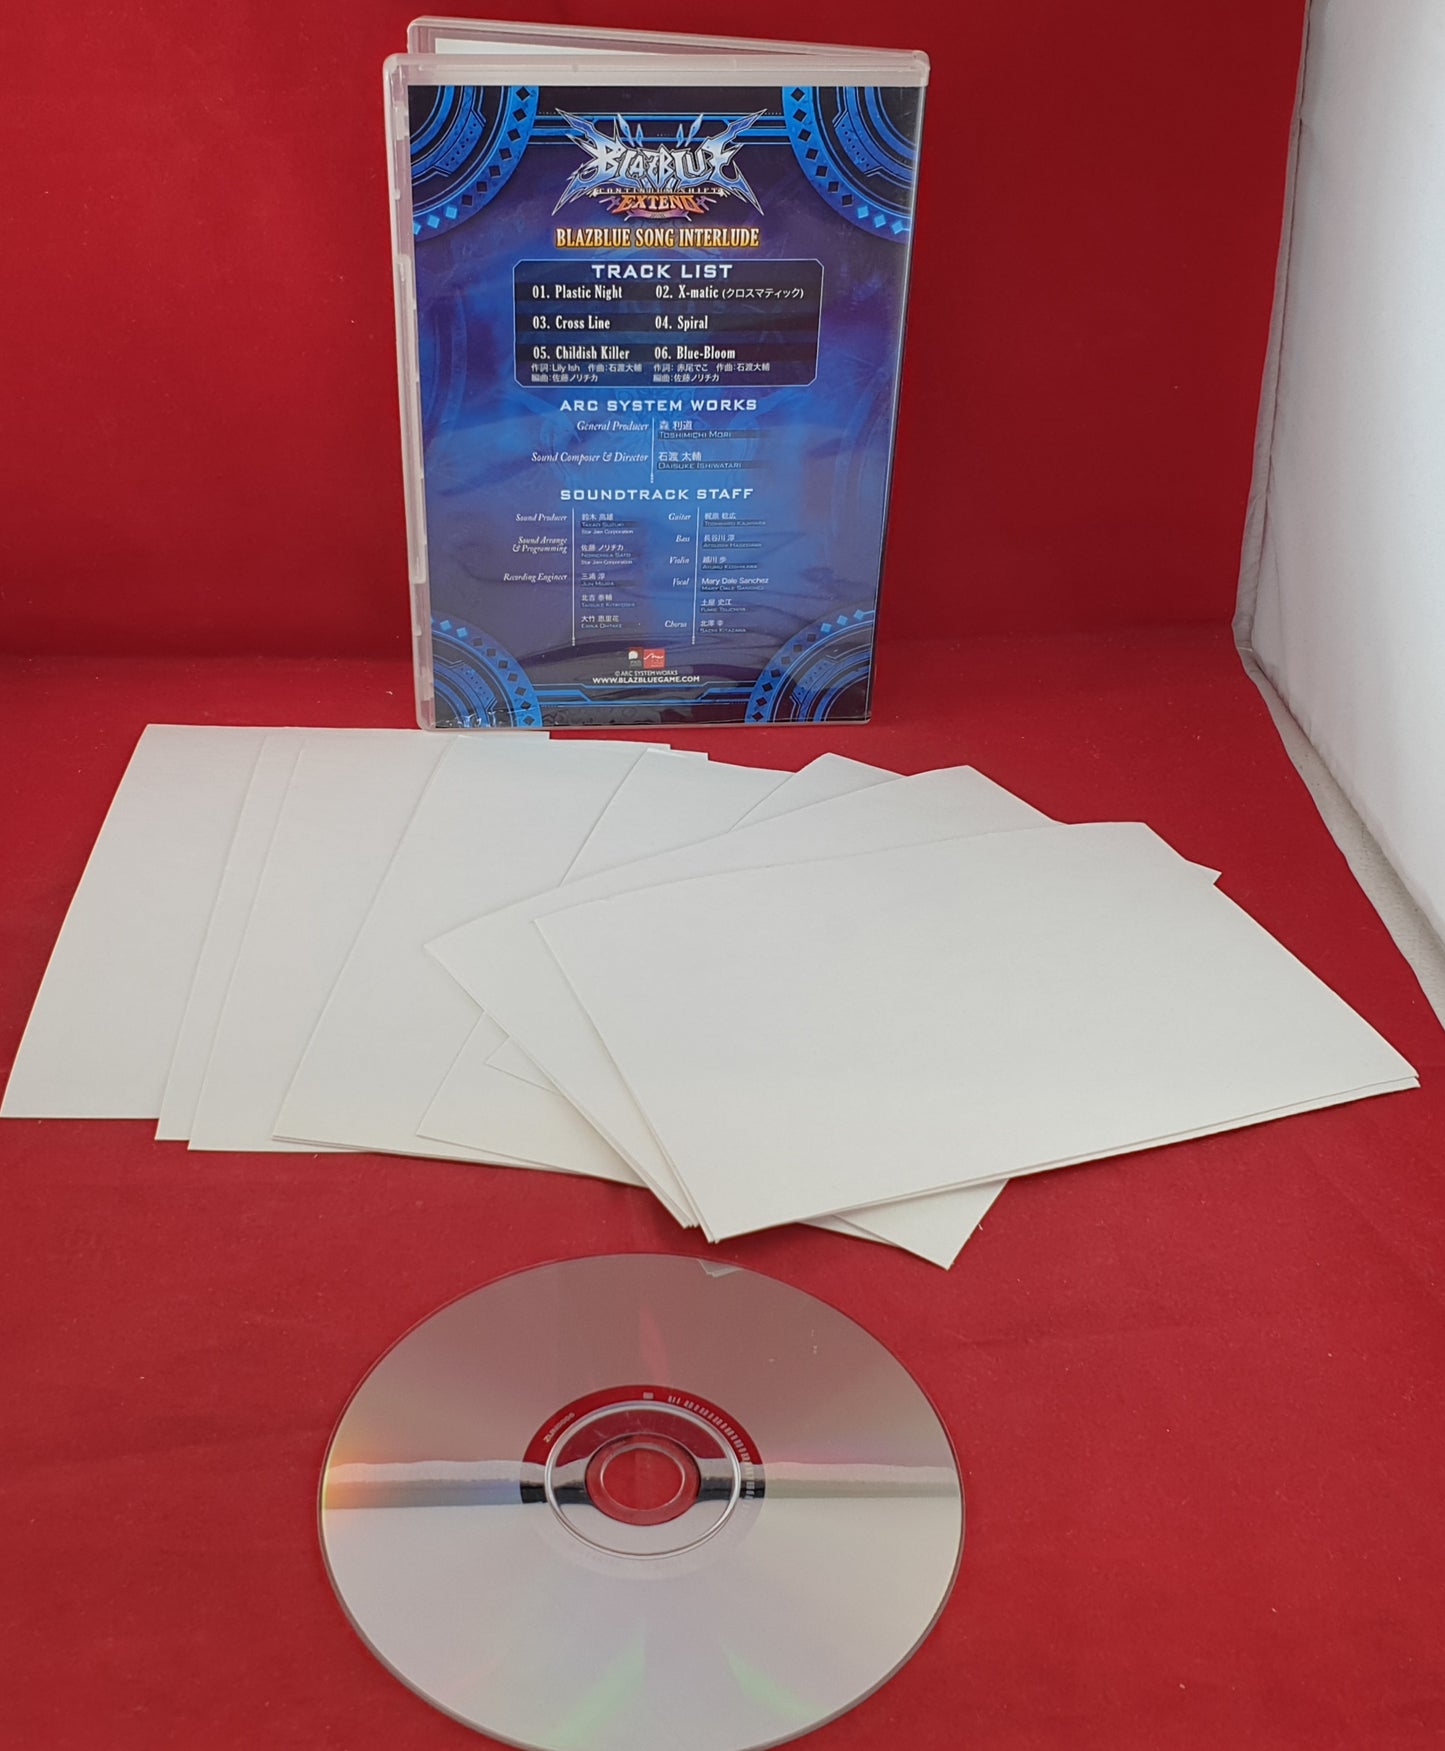 Blazblue Continuum Shift Extended Blazblue Song Interlude Audio CD